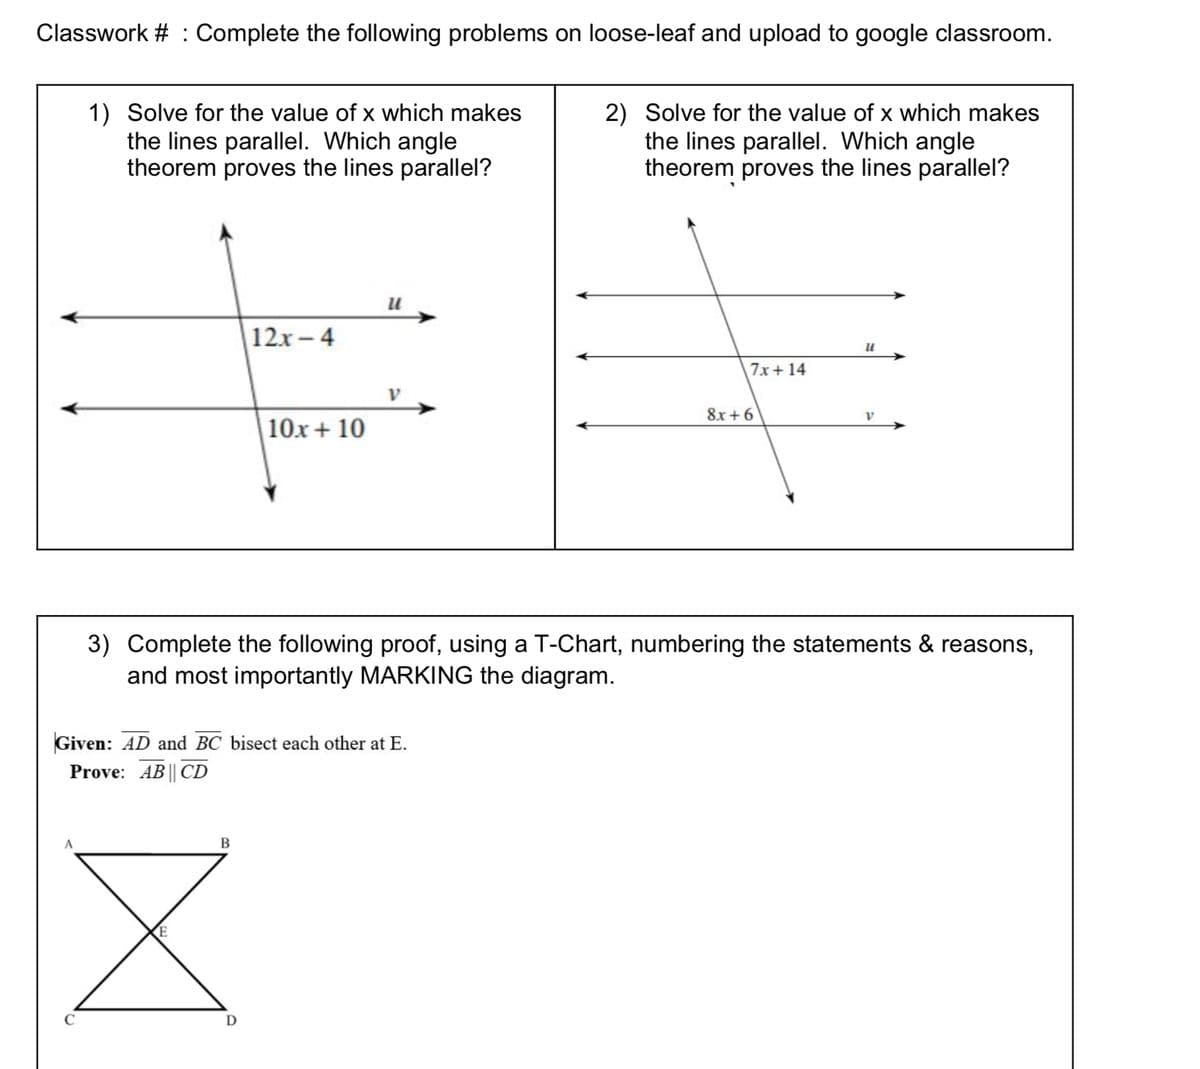 Classwork # : Complete the following problems on loose-leaf and upload to google classroom.
1) Solve for the value of x which makes
the lines parallel. Which angle
theorem proves the lines parallel?
2) Solve for the value of x which makes
the lines parallel. Which angle
theorem proves the lines parallel?
12x-4
7x+14
8x +6
V.
|10x+ 10
3) Complete the following proof, using a T-Chart, numbering the statements & reasons,
and most importantly MARKING the diagram.
Given: AD and BC bisect each other at E.
Prove: AB || CD
В
D
